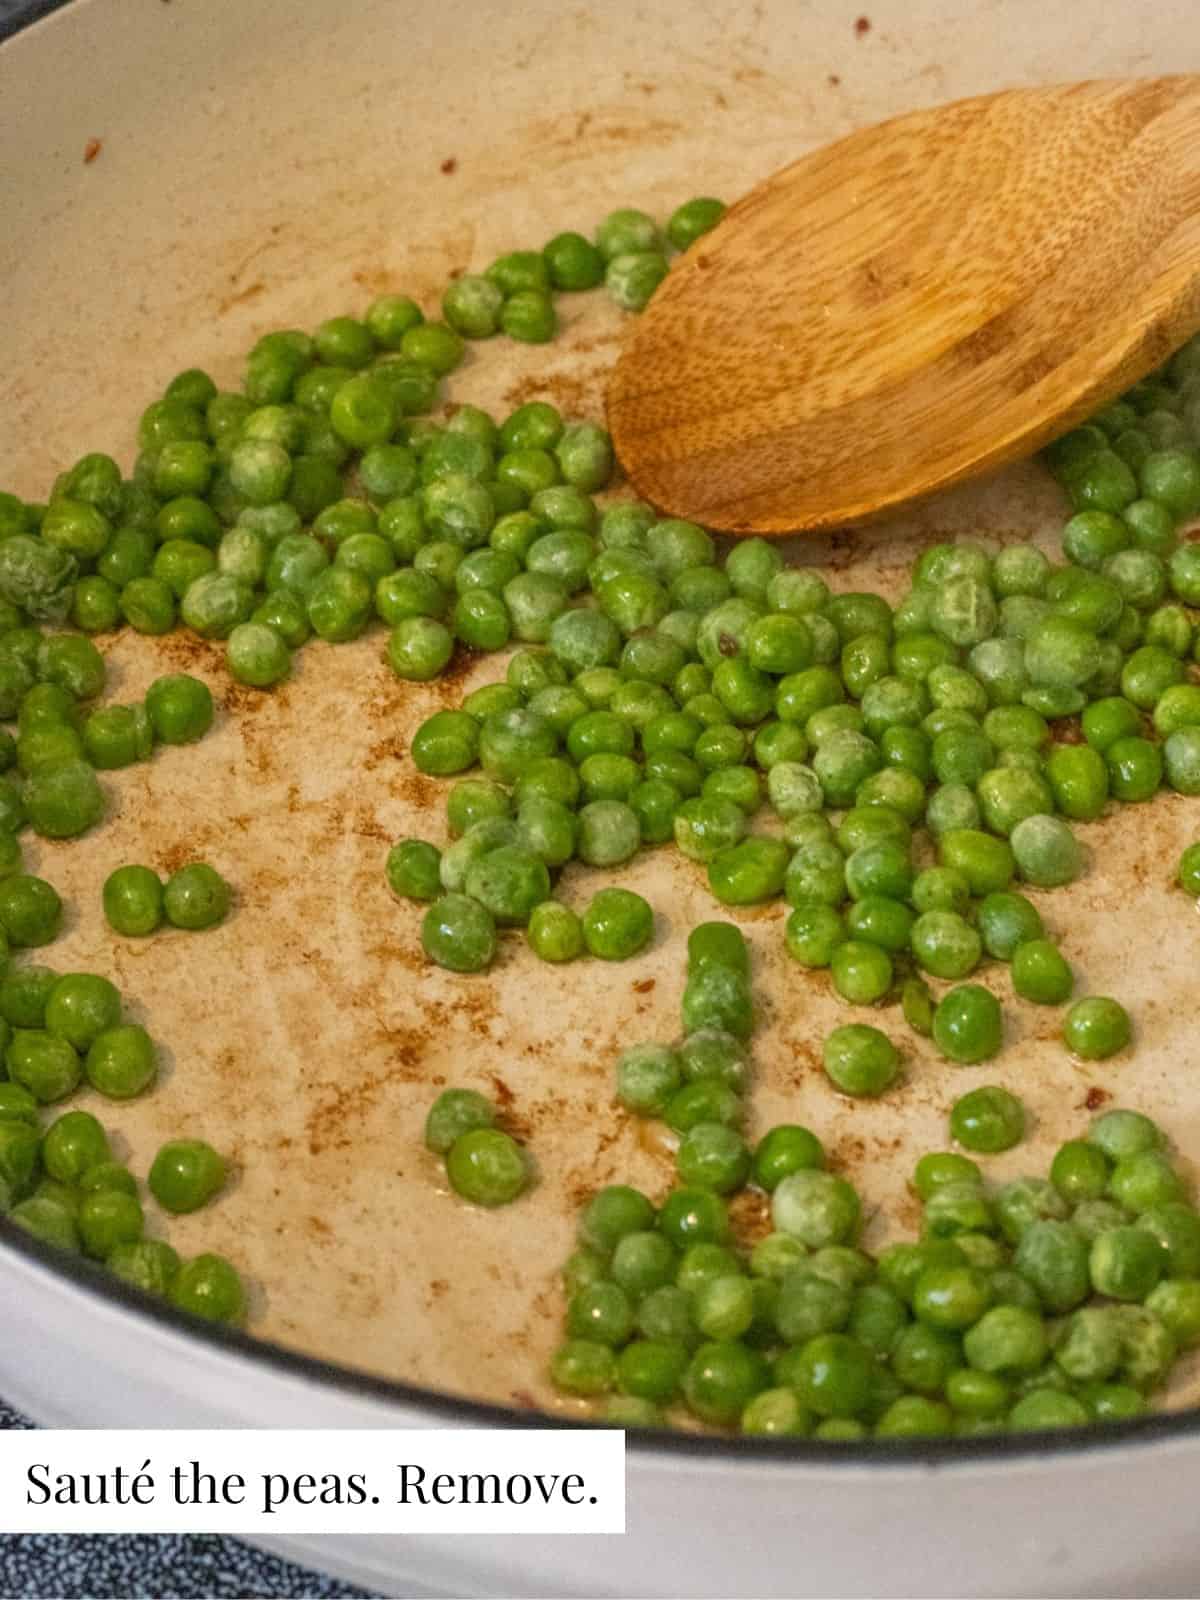 Peas sautéing in a pan with a wooden spoon.